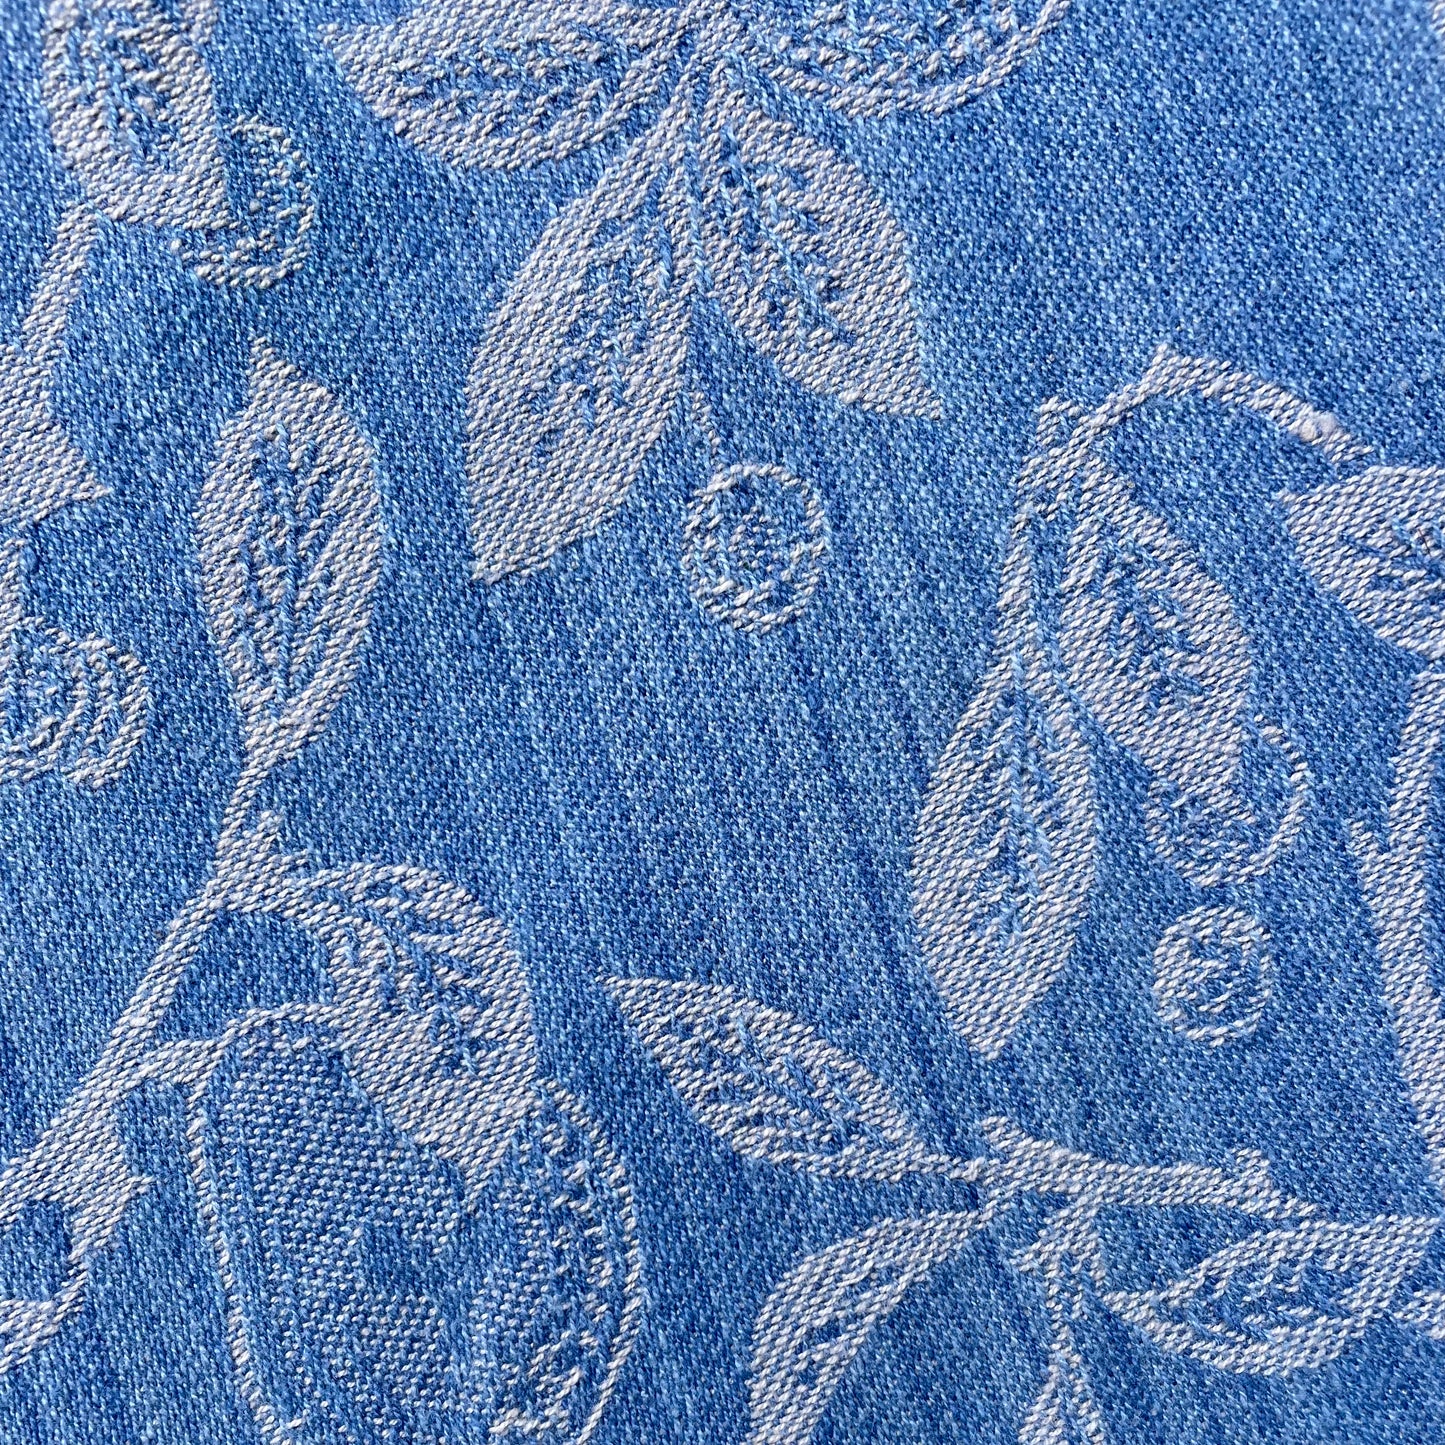 Pears & Cherries Blue Tablecloth